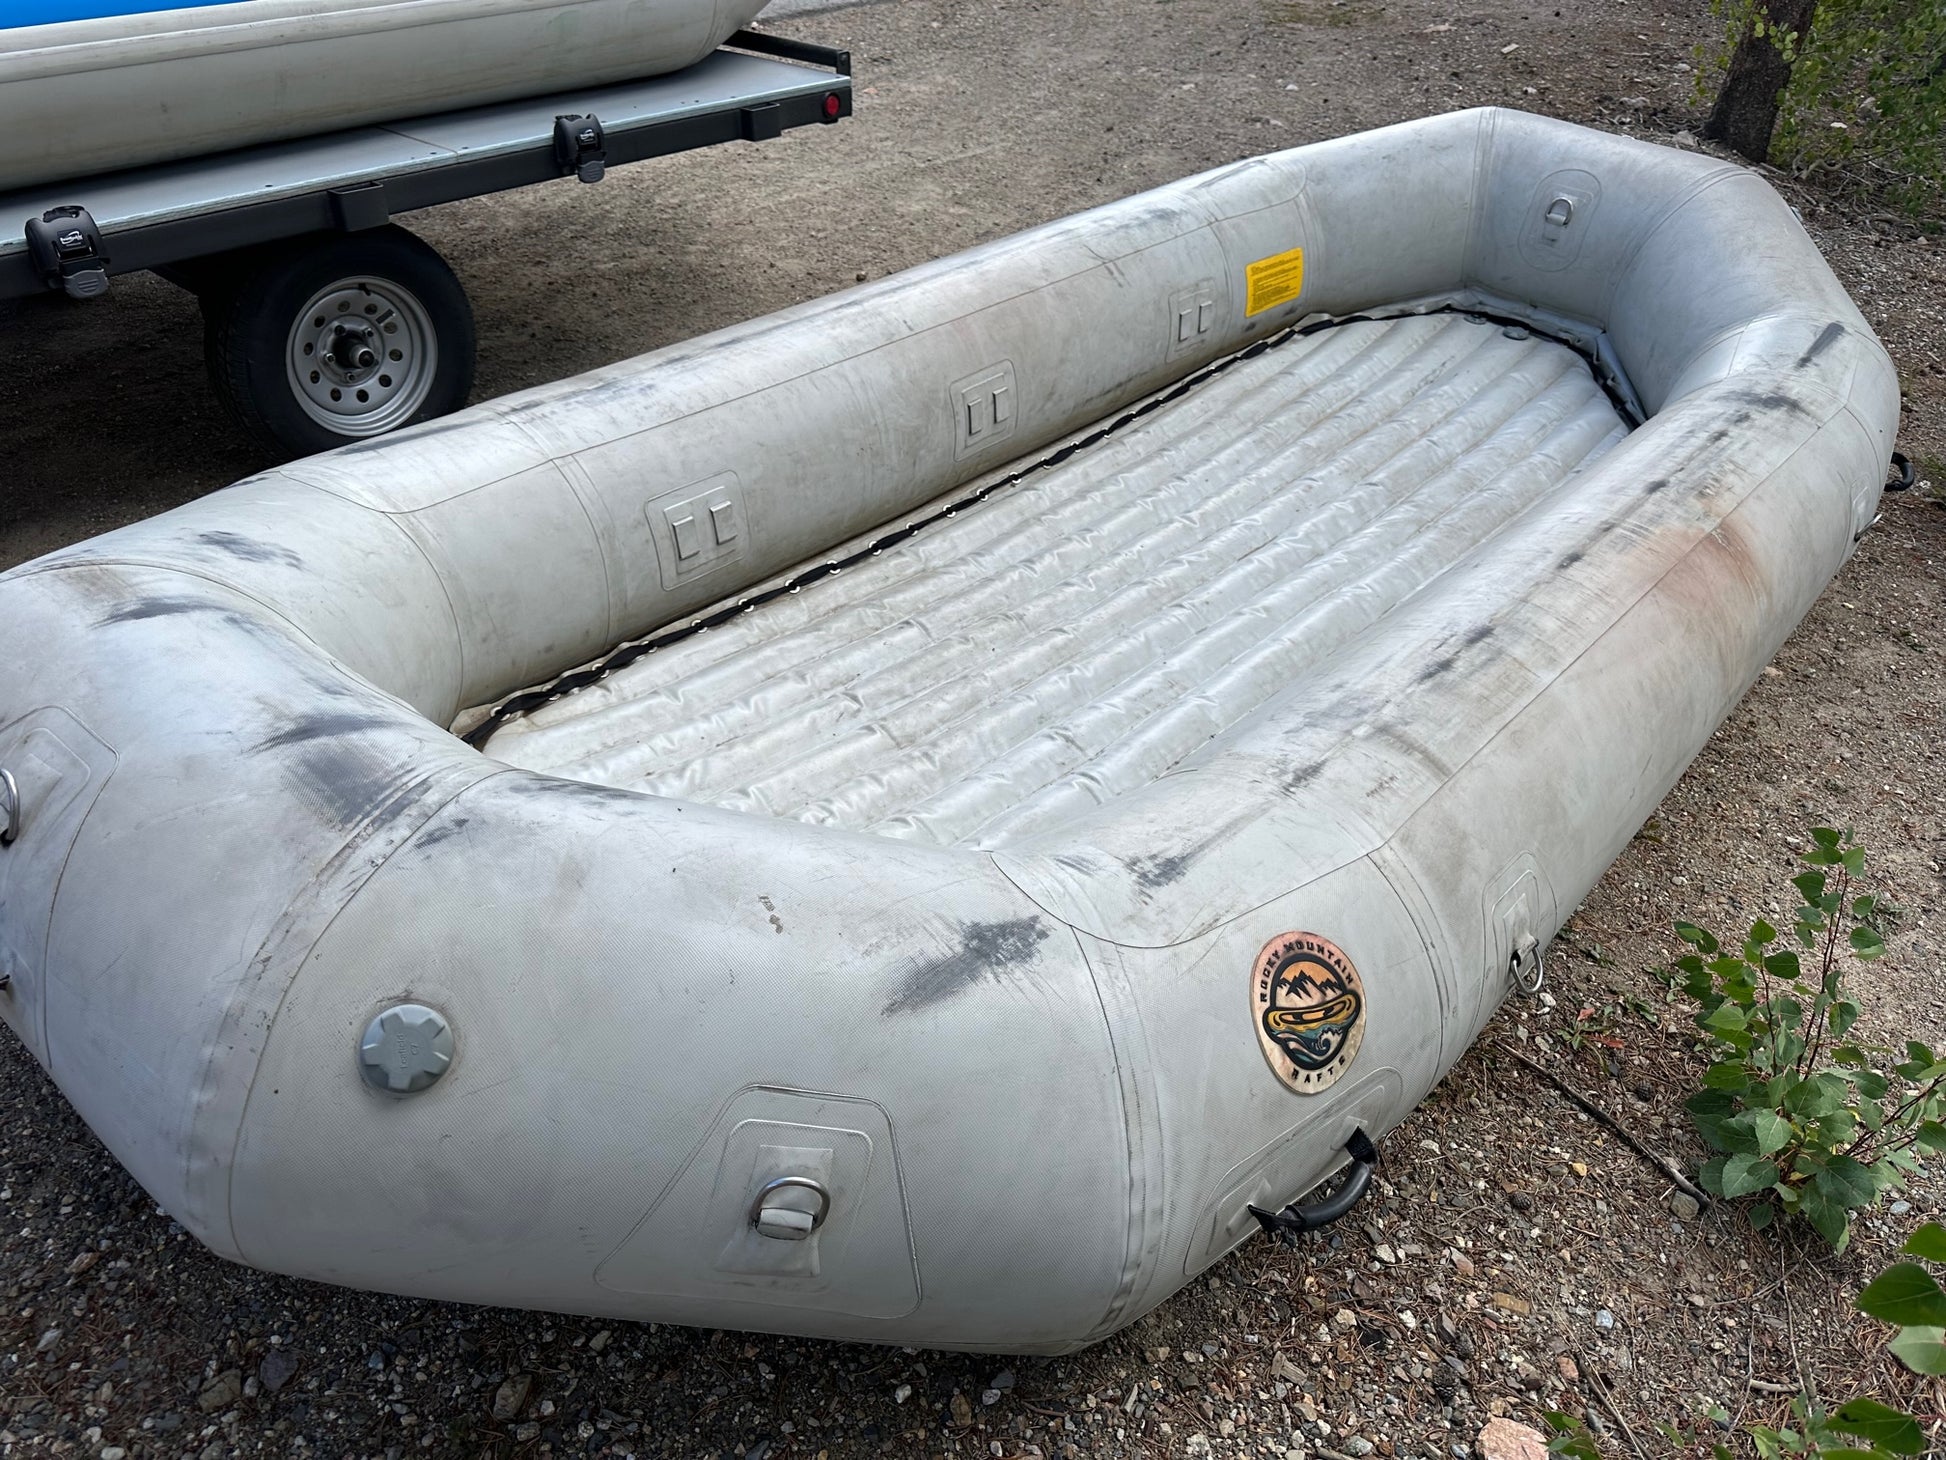 An inflatable Used 14' Rocky Mountain Raft sitting in fair condition next to a trailer made by 4CRS.